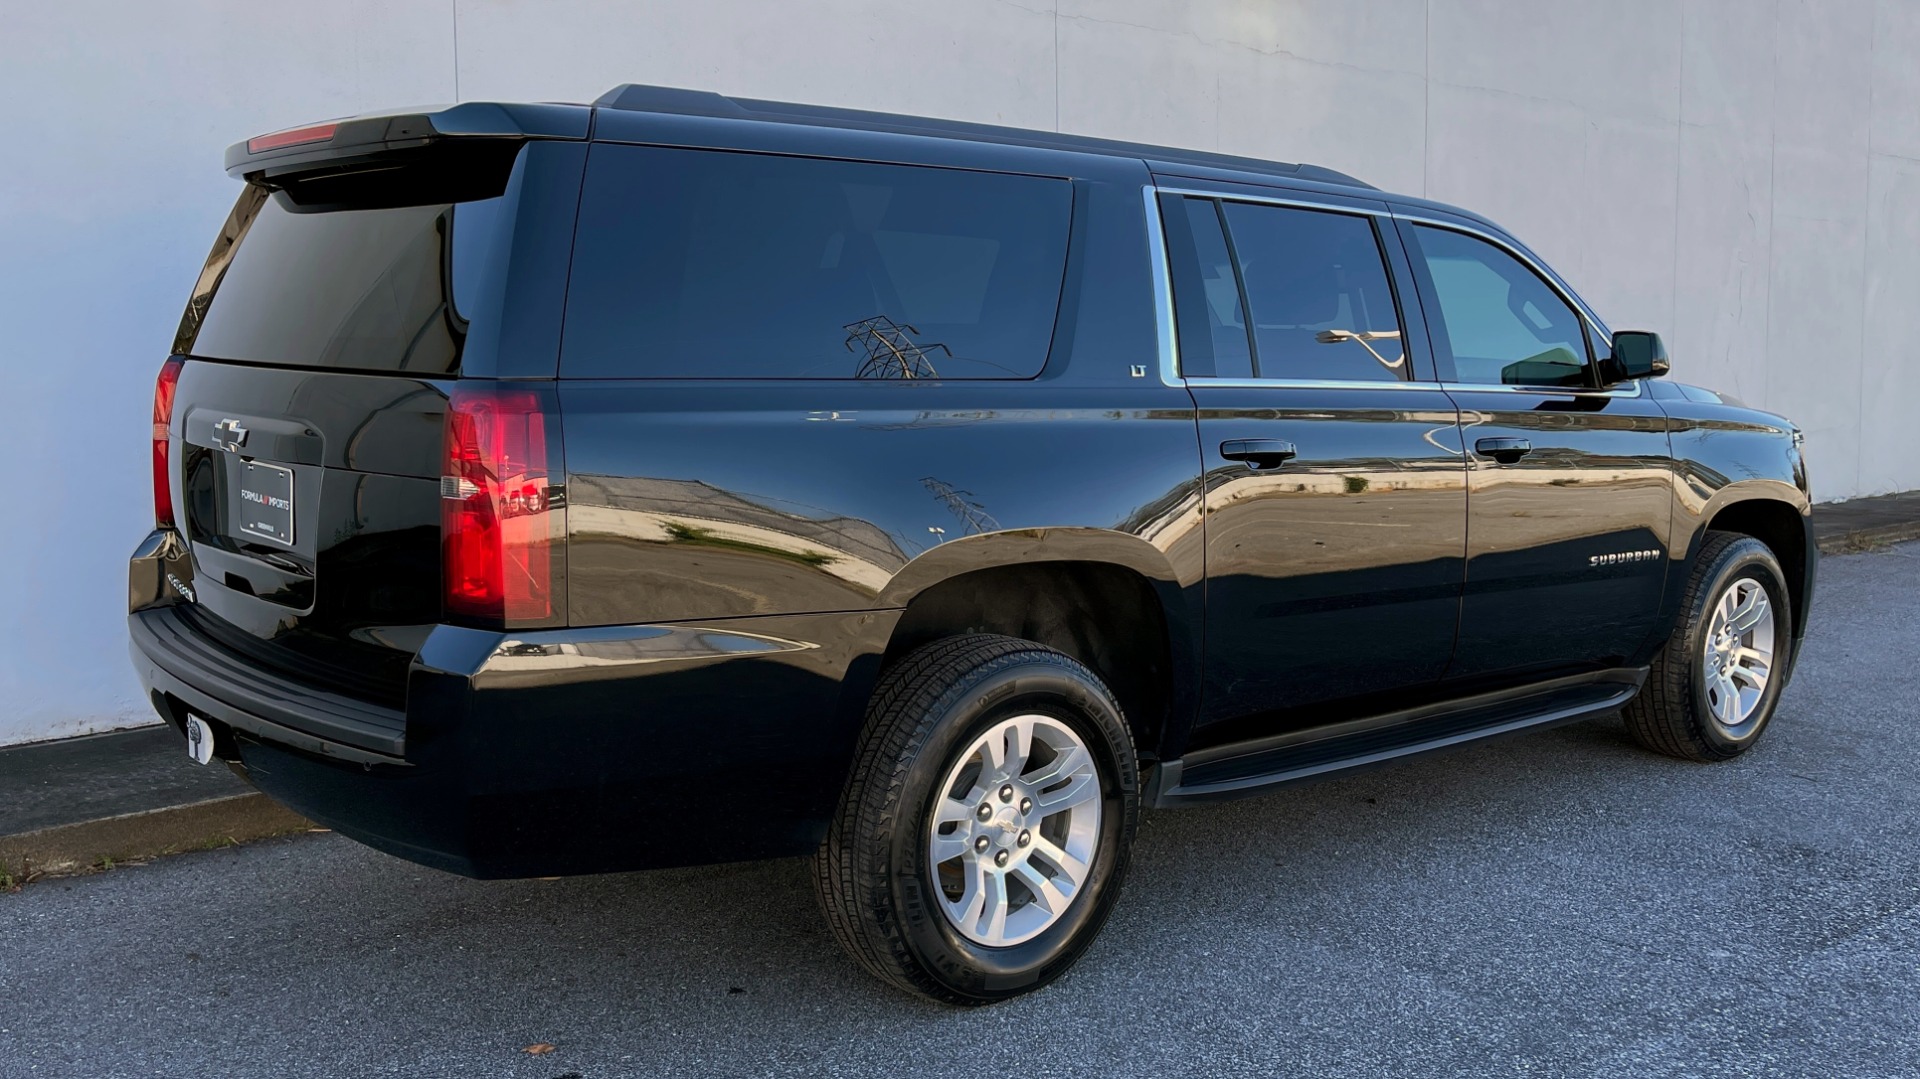 Used 2019 Chevrolet SUBURBAN LT 4X4 / 5.3L V8 / NAV / BOSE / HTD STS / 3-ROW / TOW / REARVIEW for sale Sold at Formula Imports in Charlotte NC 28227 5